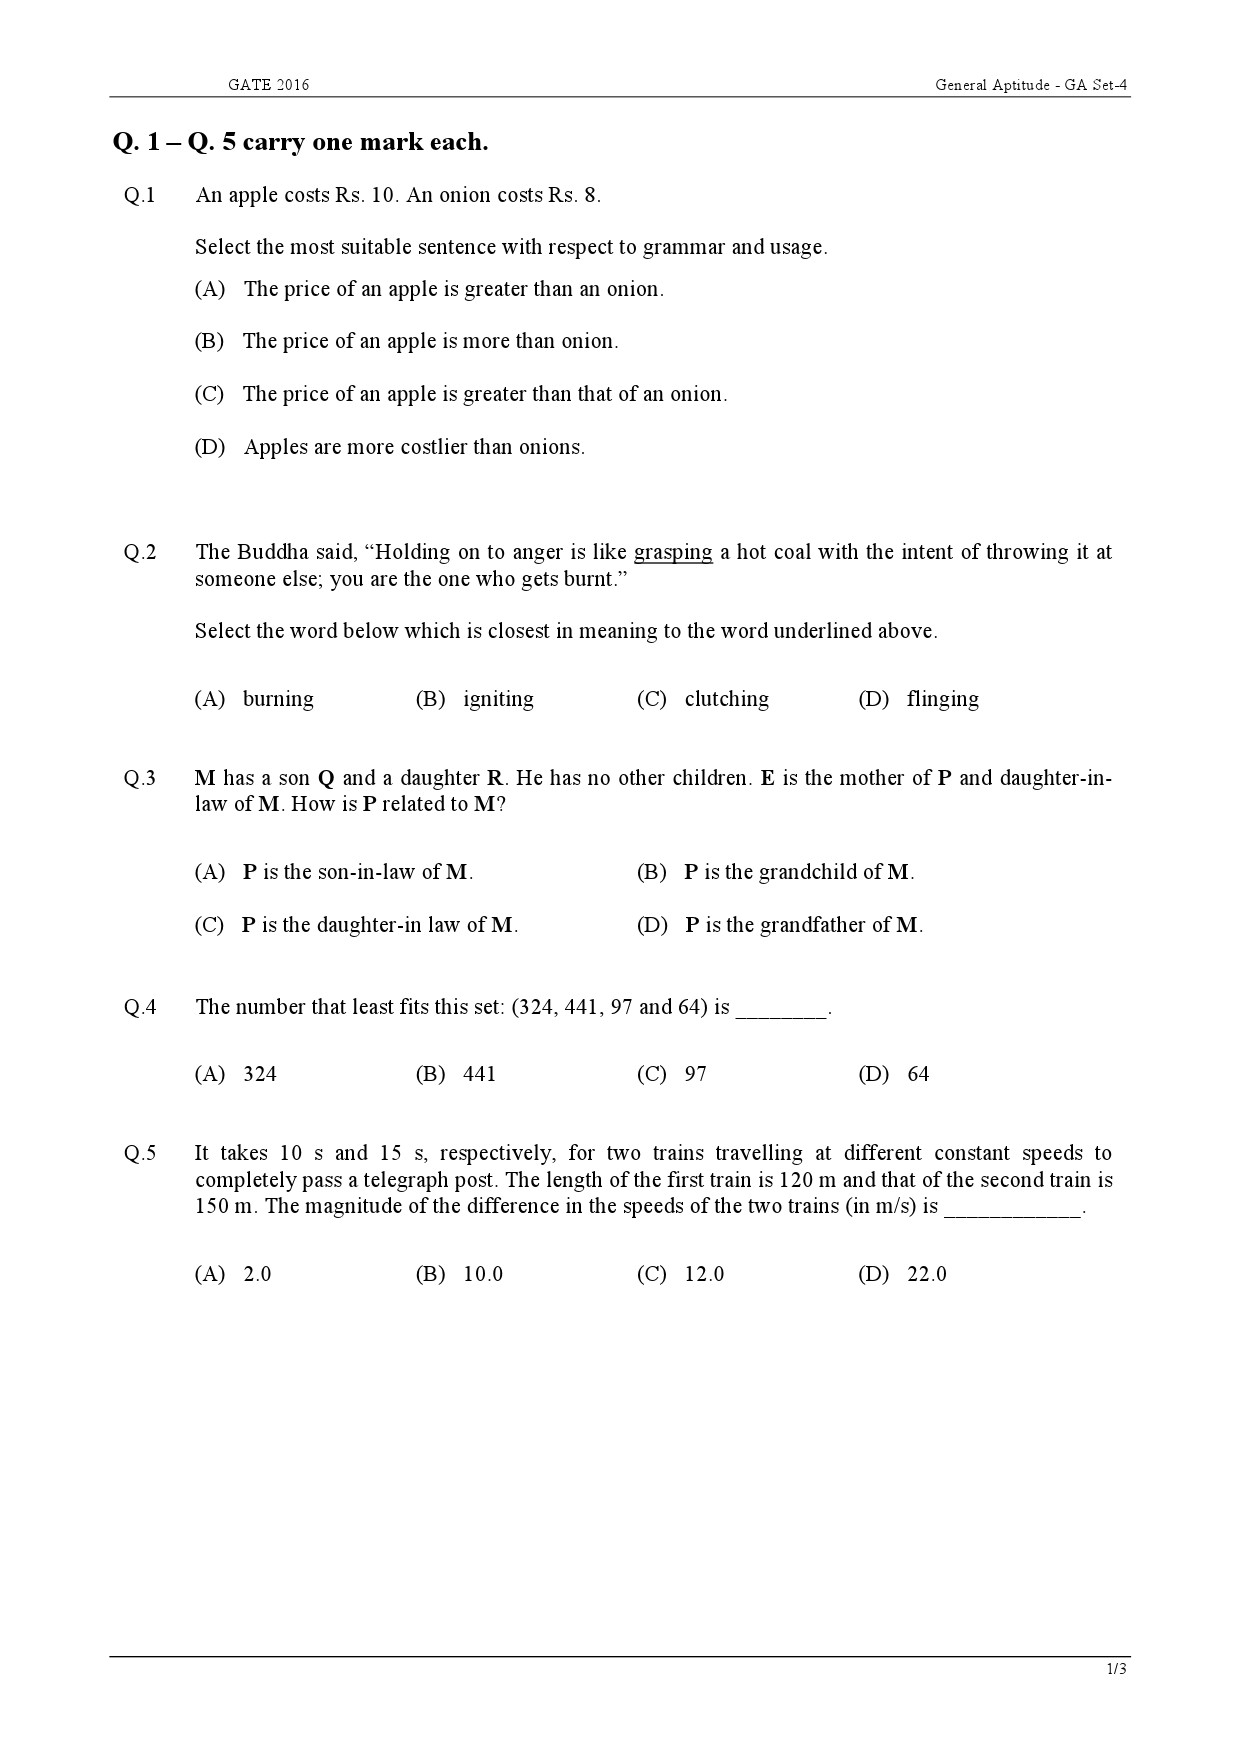 GATE Exam Question Paper 2016 Architecture and Planning 1